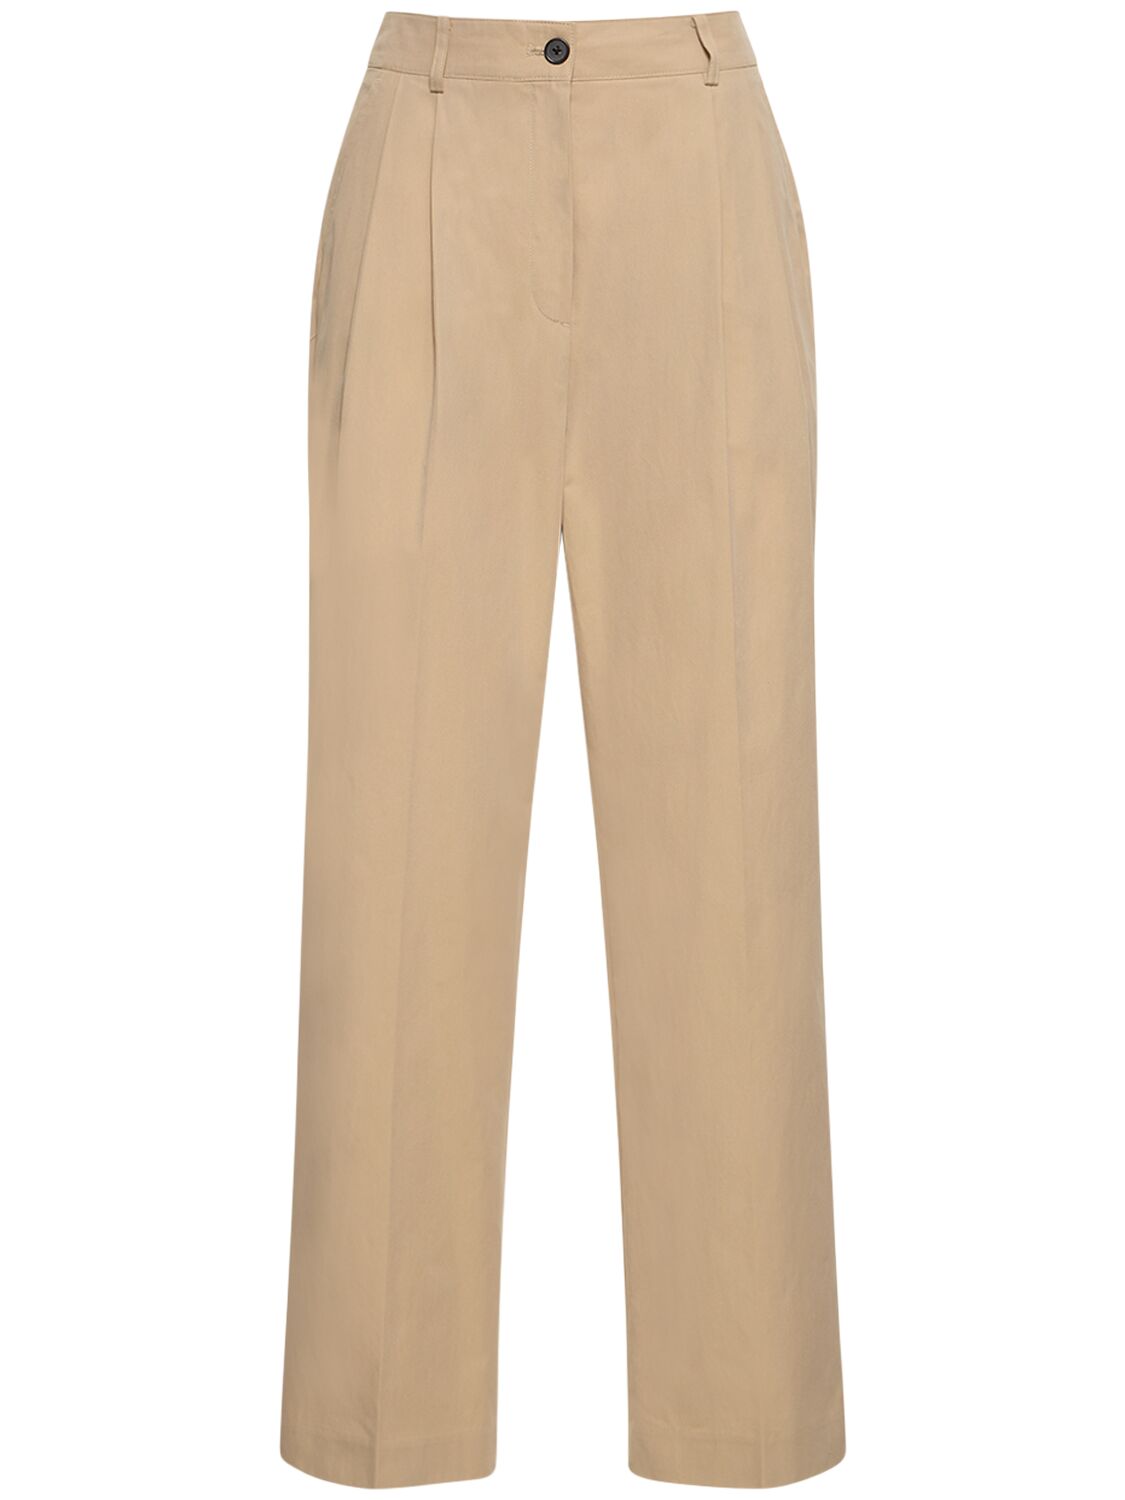 Shop Dunst Pleated Cotton & Nylon Chino Pants In Beige